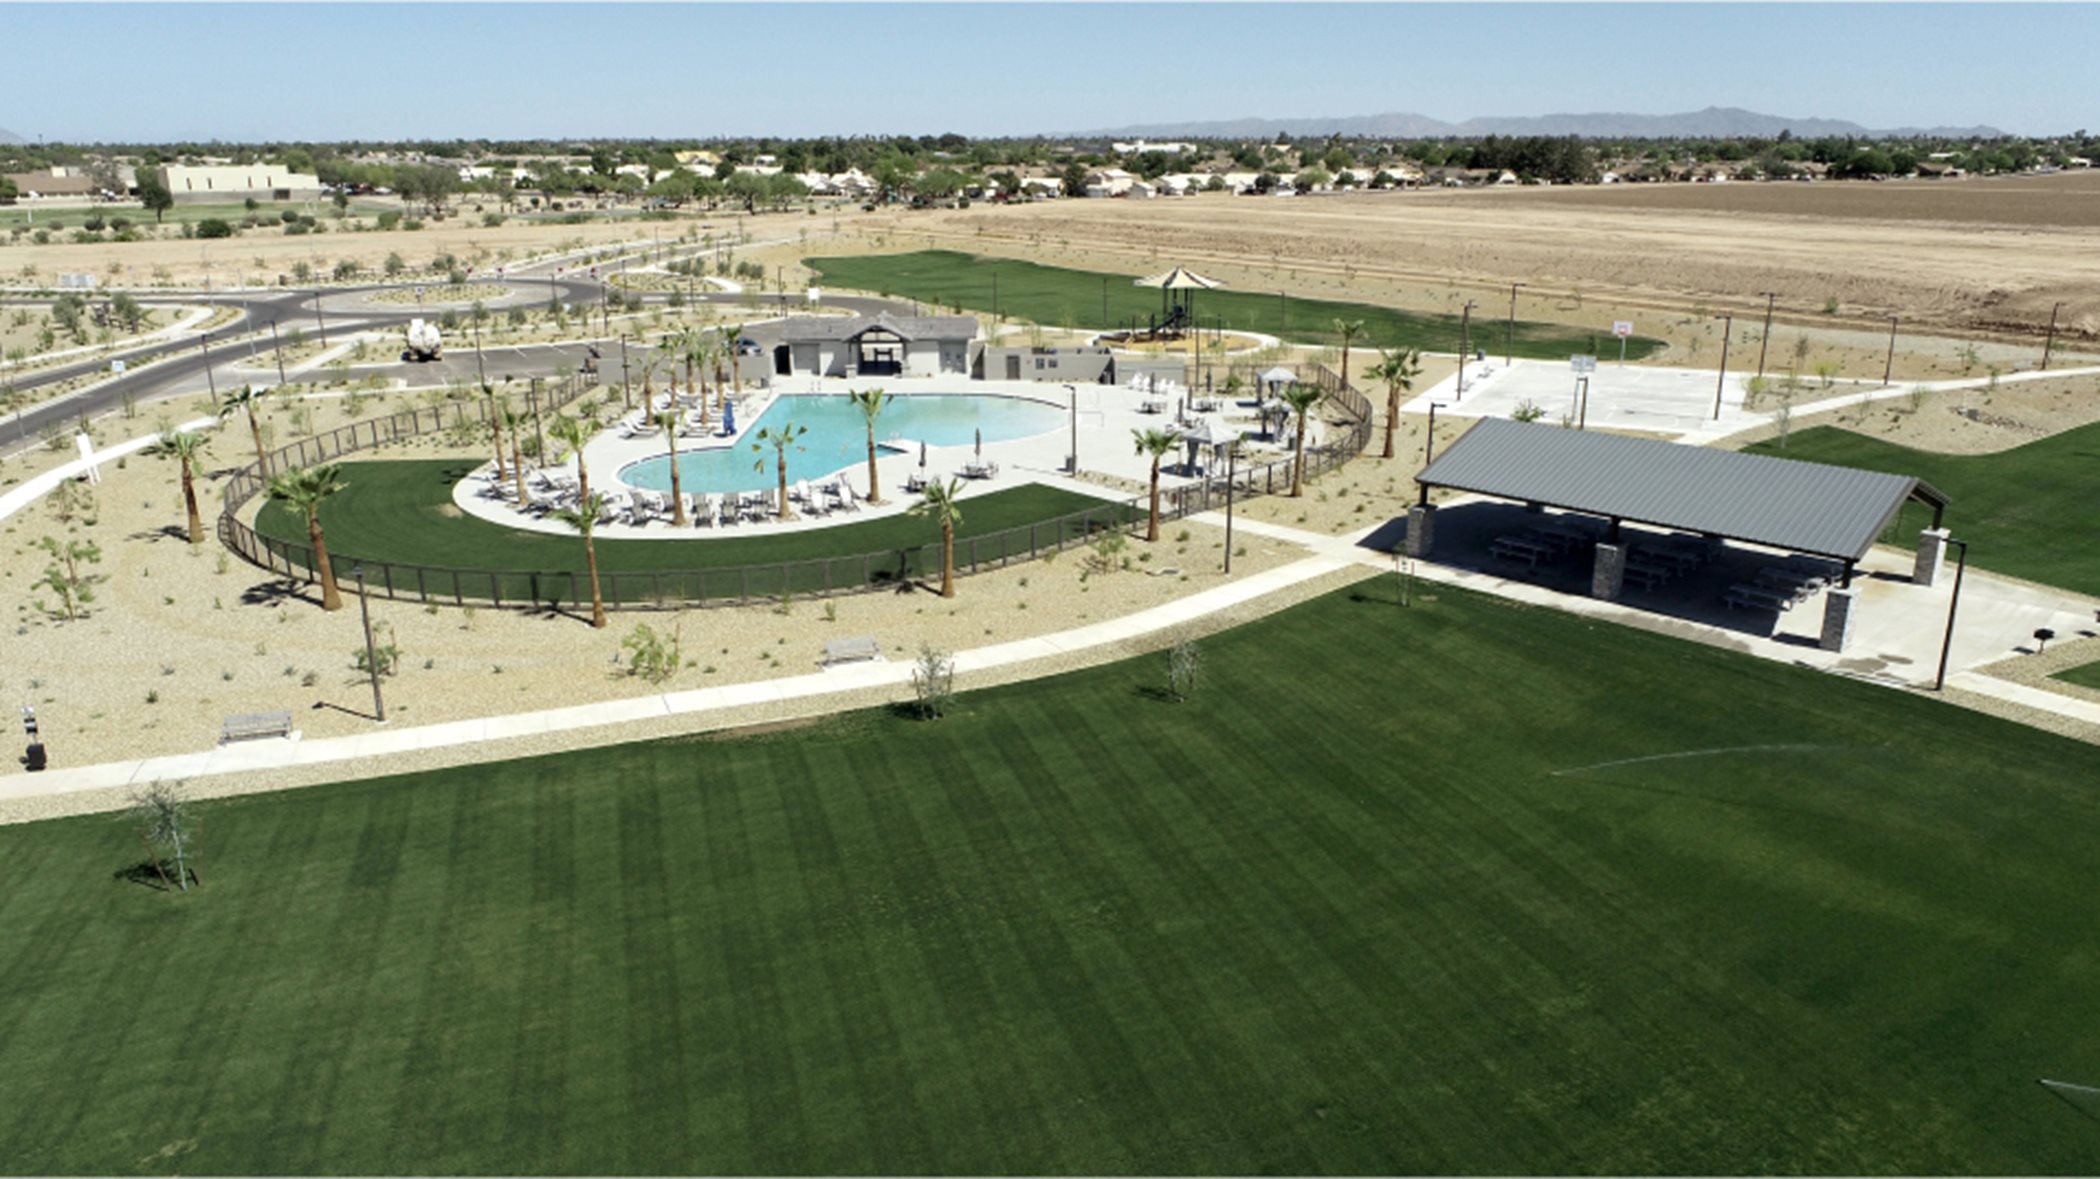 Pool and field